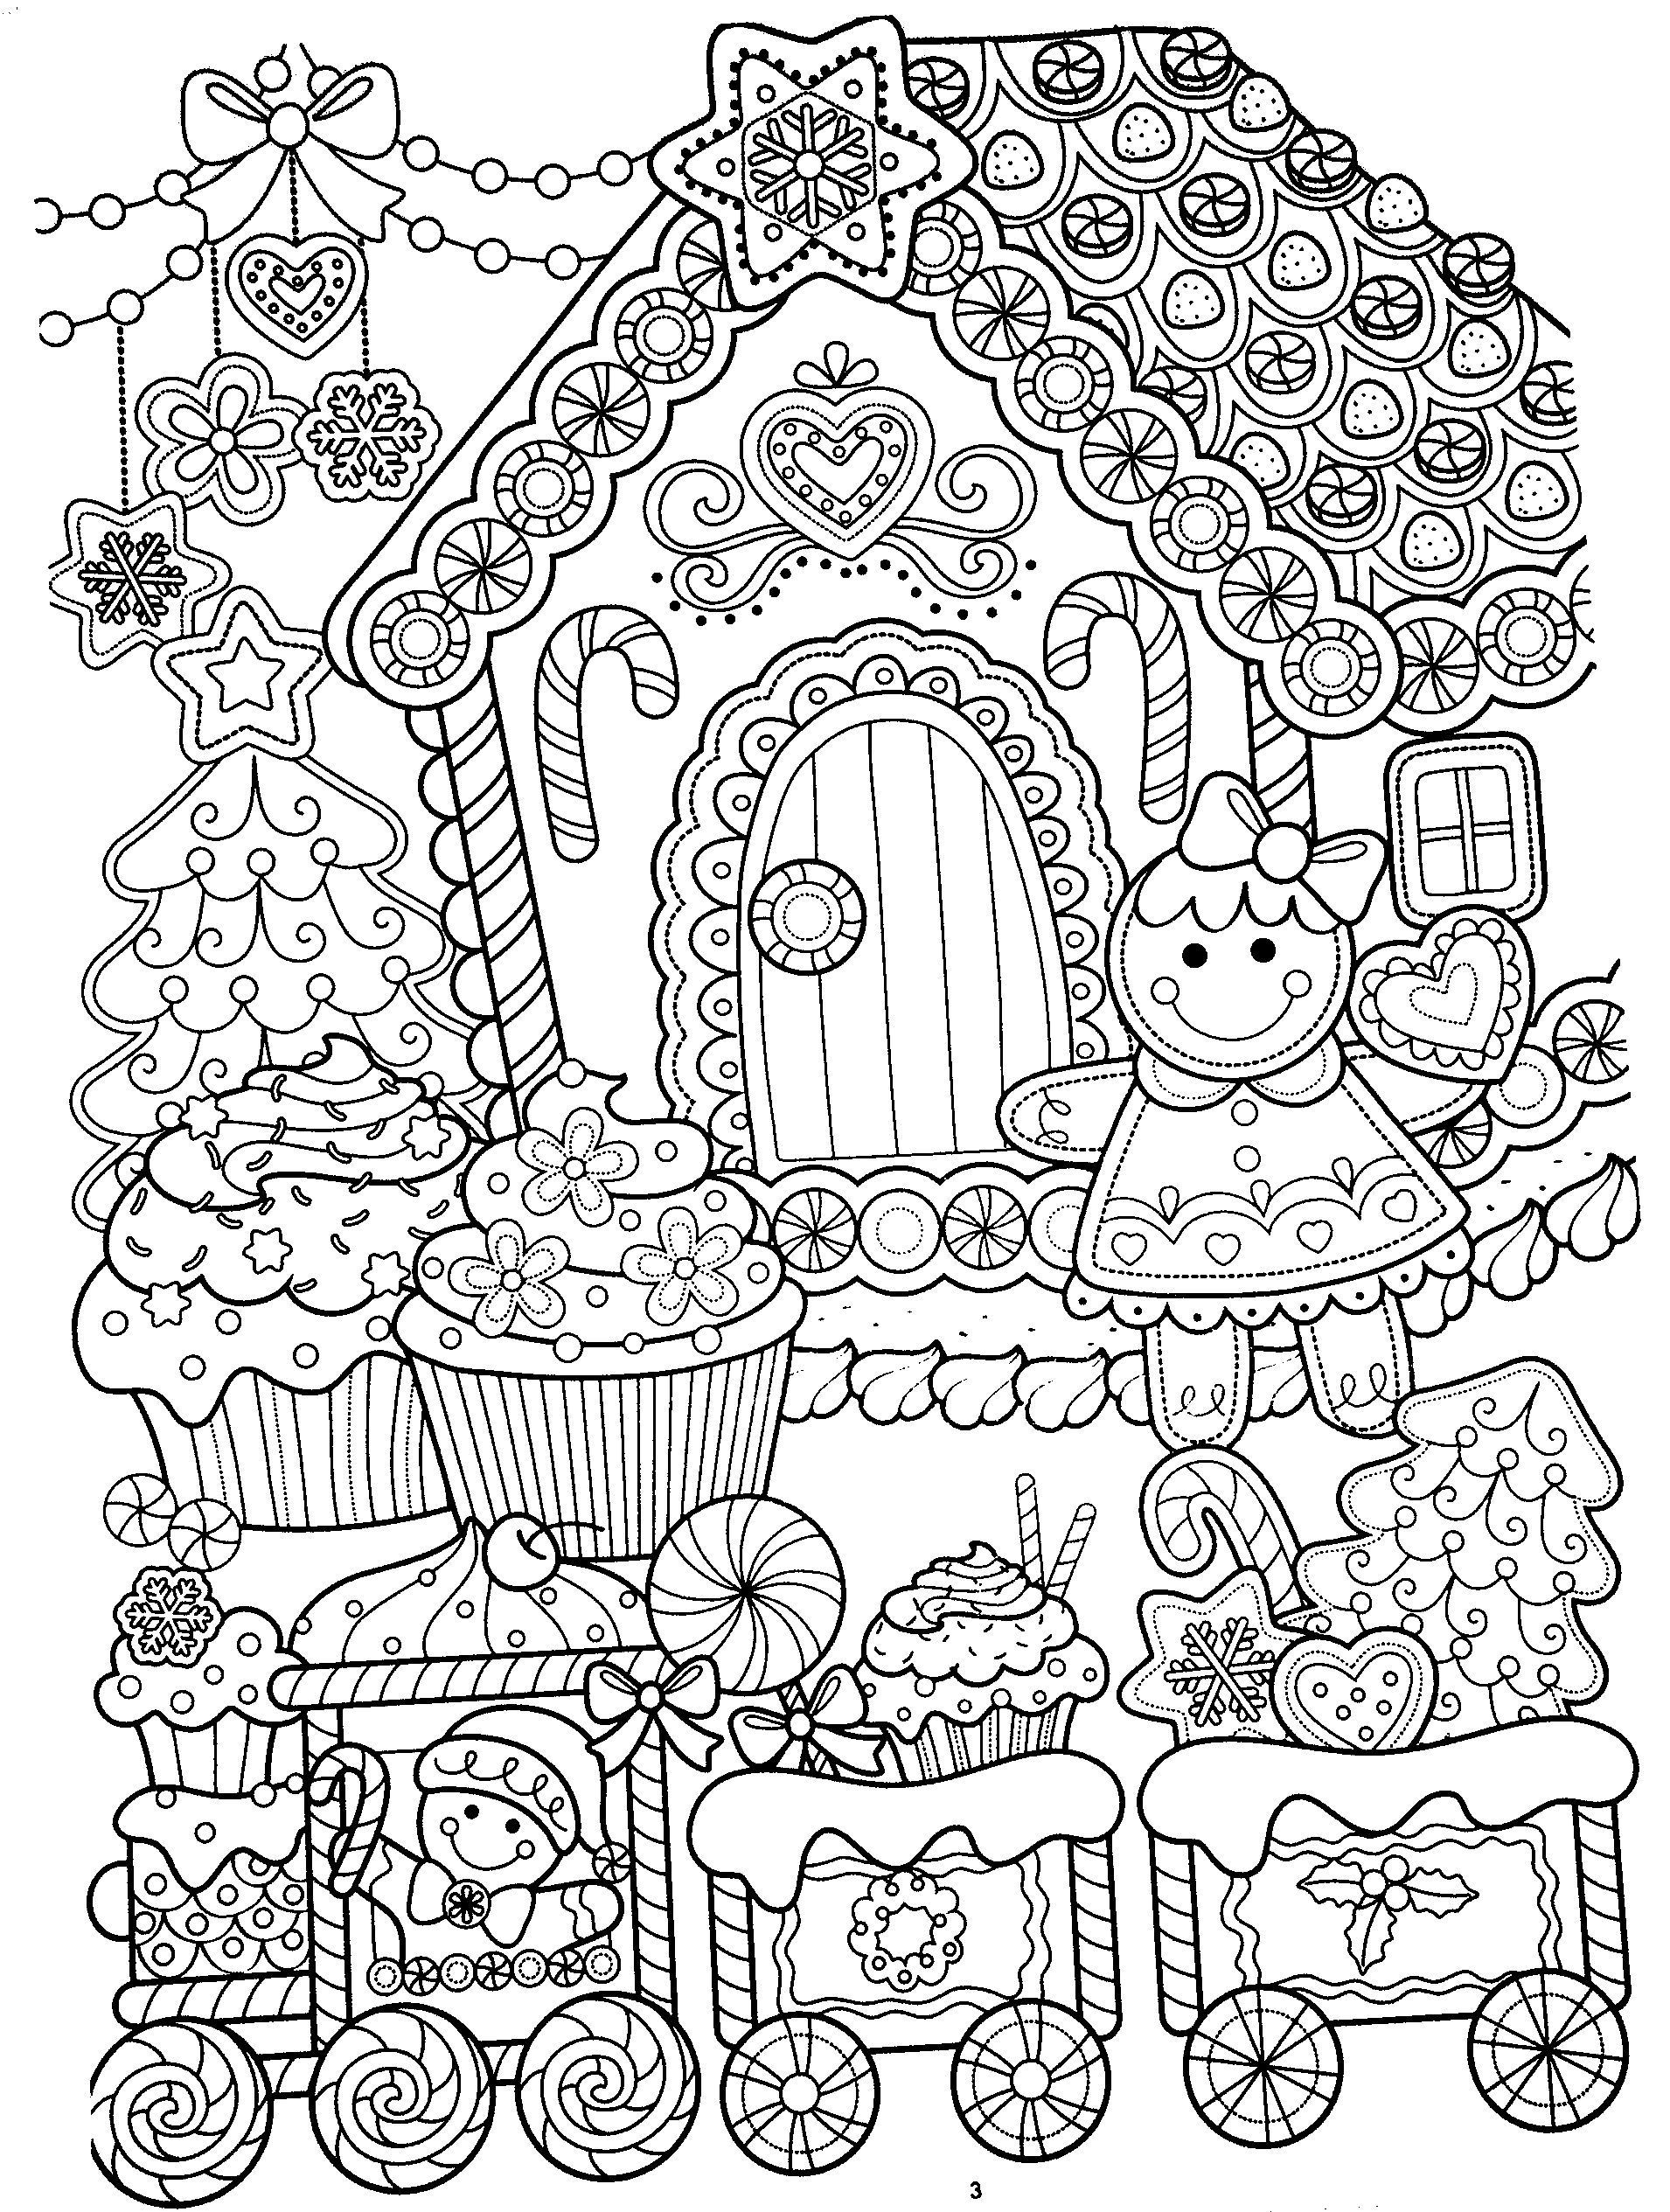 Pin by viilma alverio on crafts new year coloring pages printable christmas coloring pages christmas coloring sheets